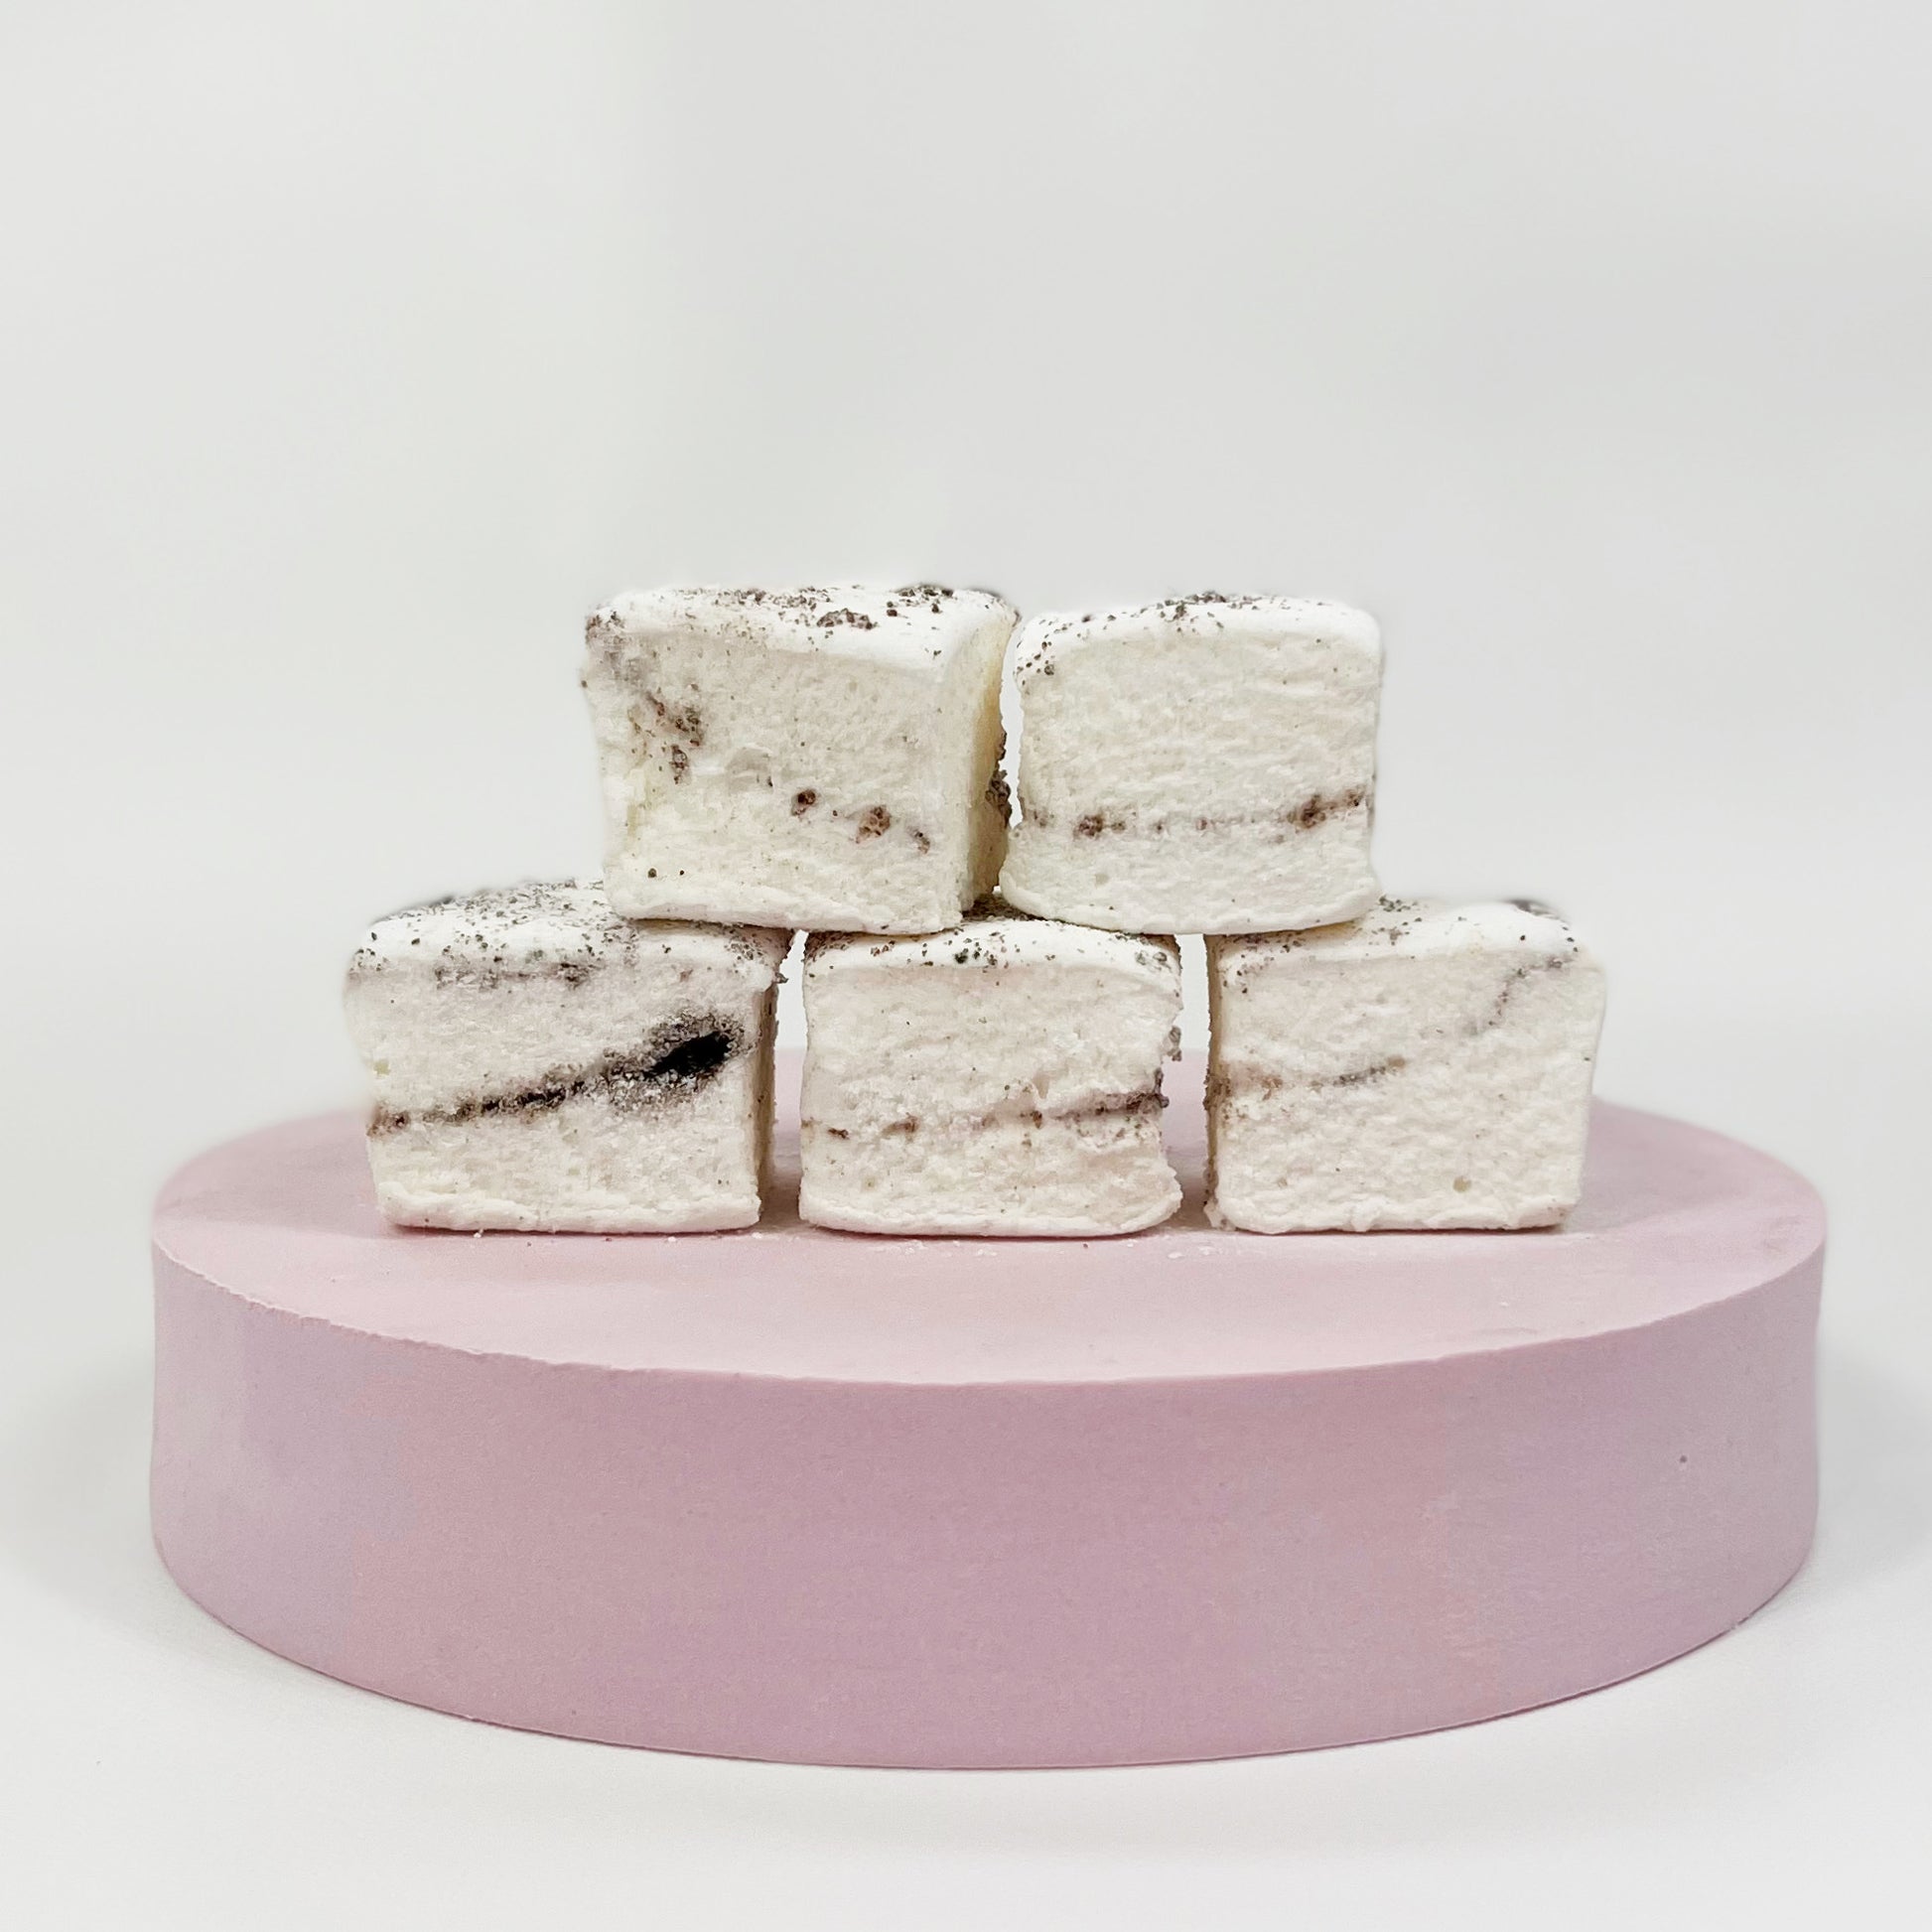 Cookies and Cream marshmallows